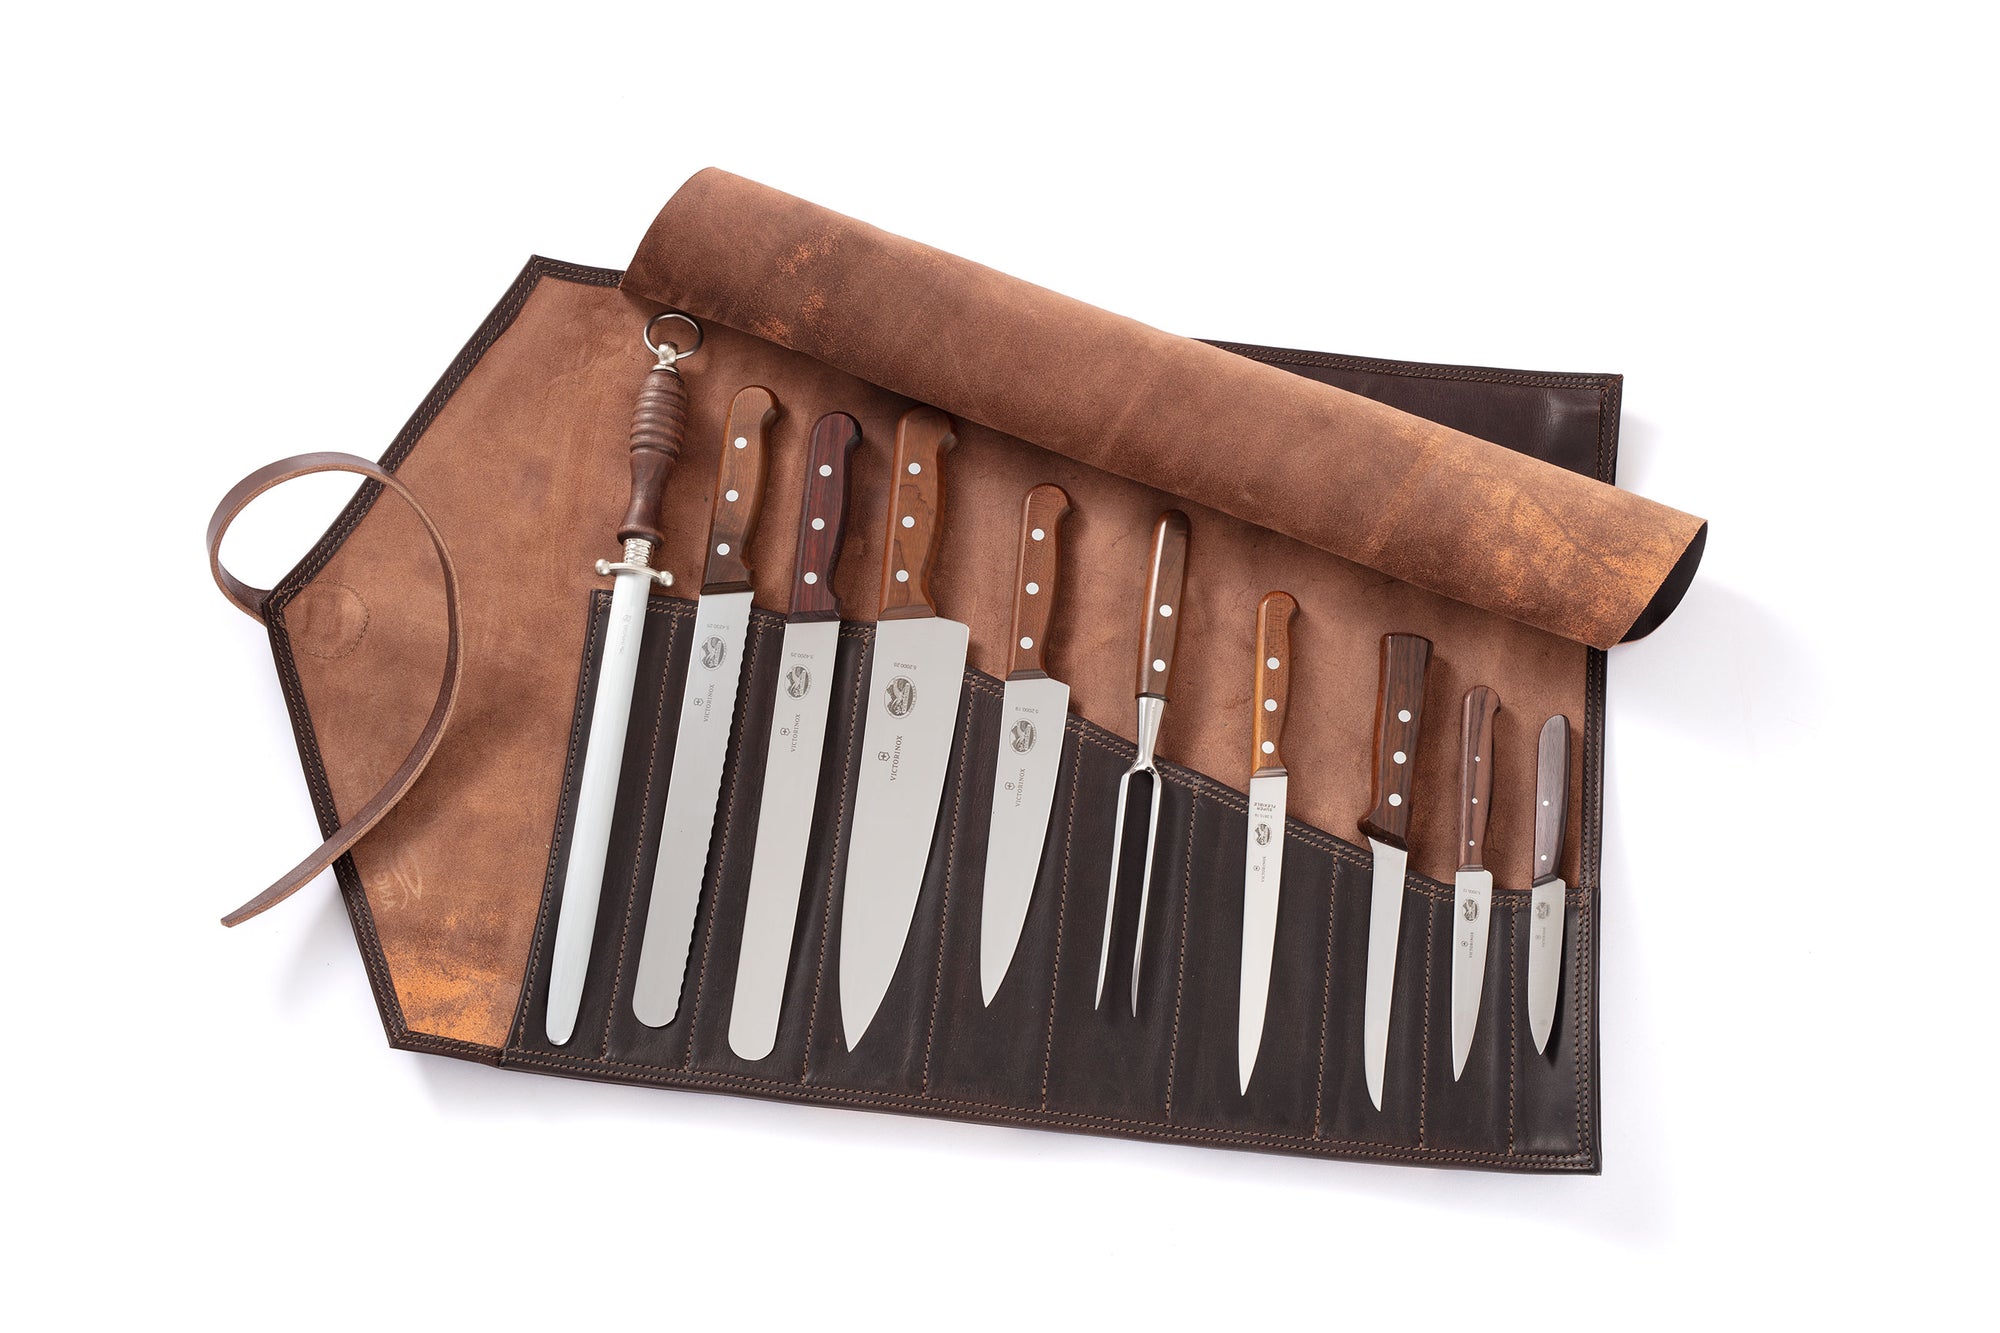 Chefs Leather Knife Roll with 10 Piece Knife Set